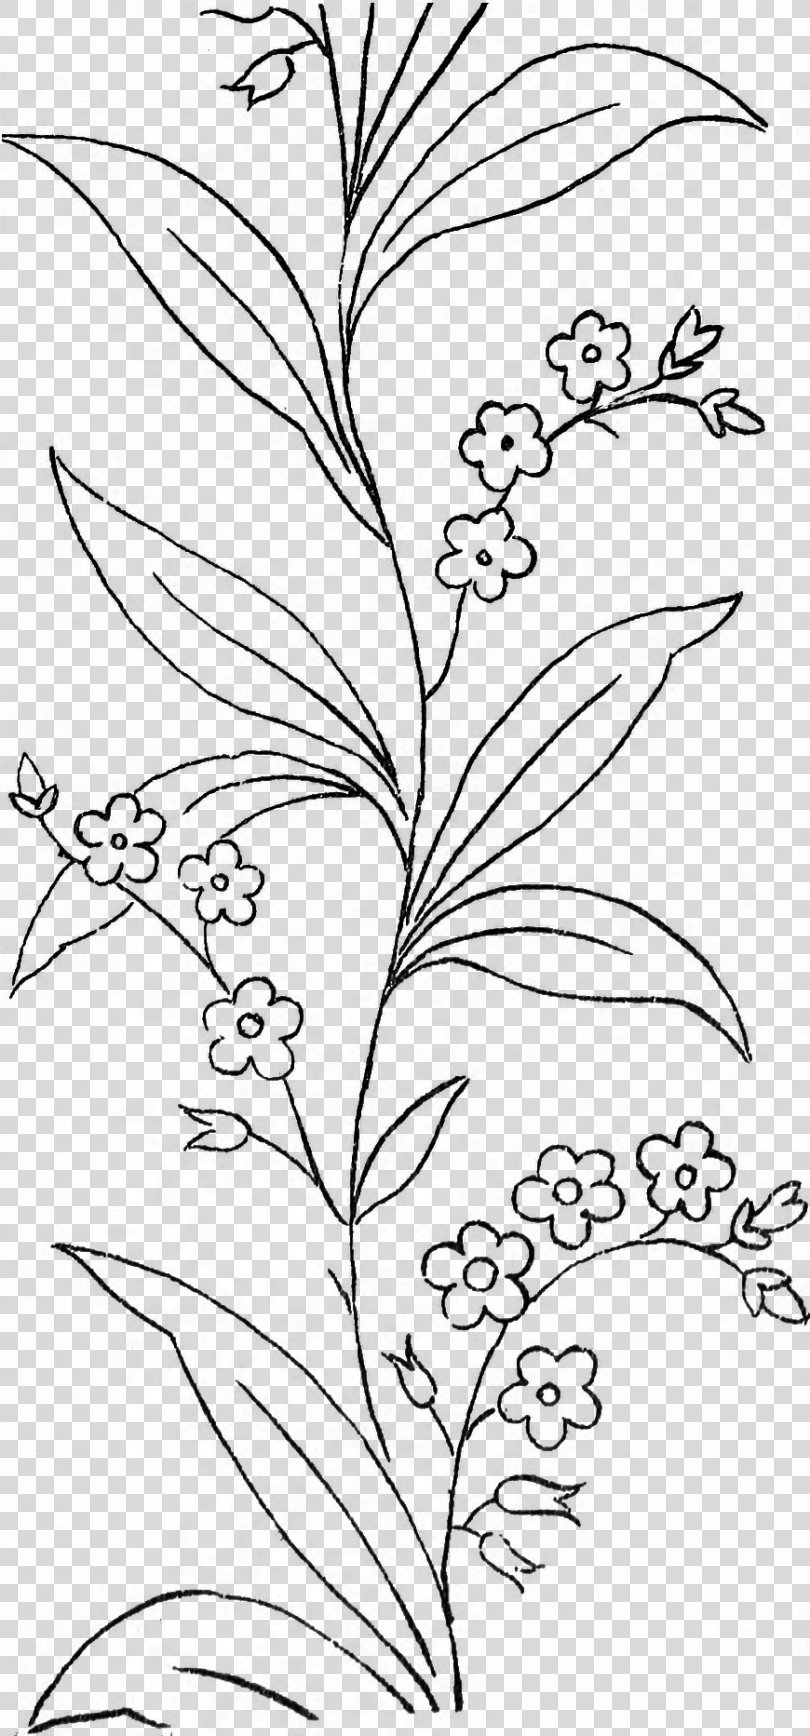 Black And White Leaf Line Art Drawing Coloring Book, Forget Me Not PNG